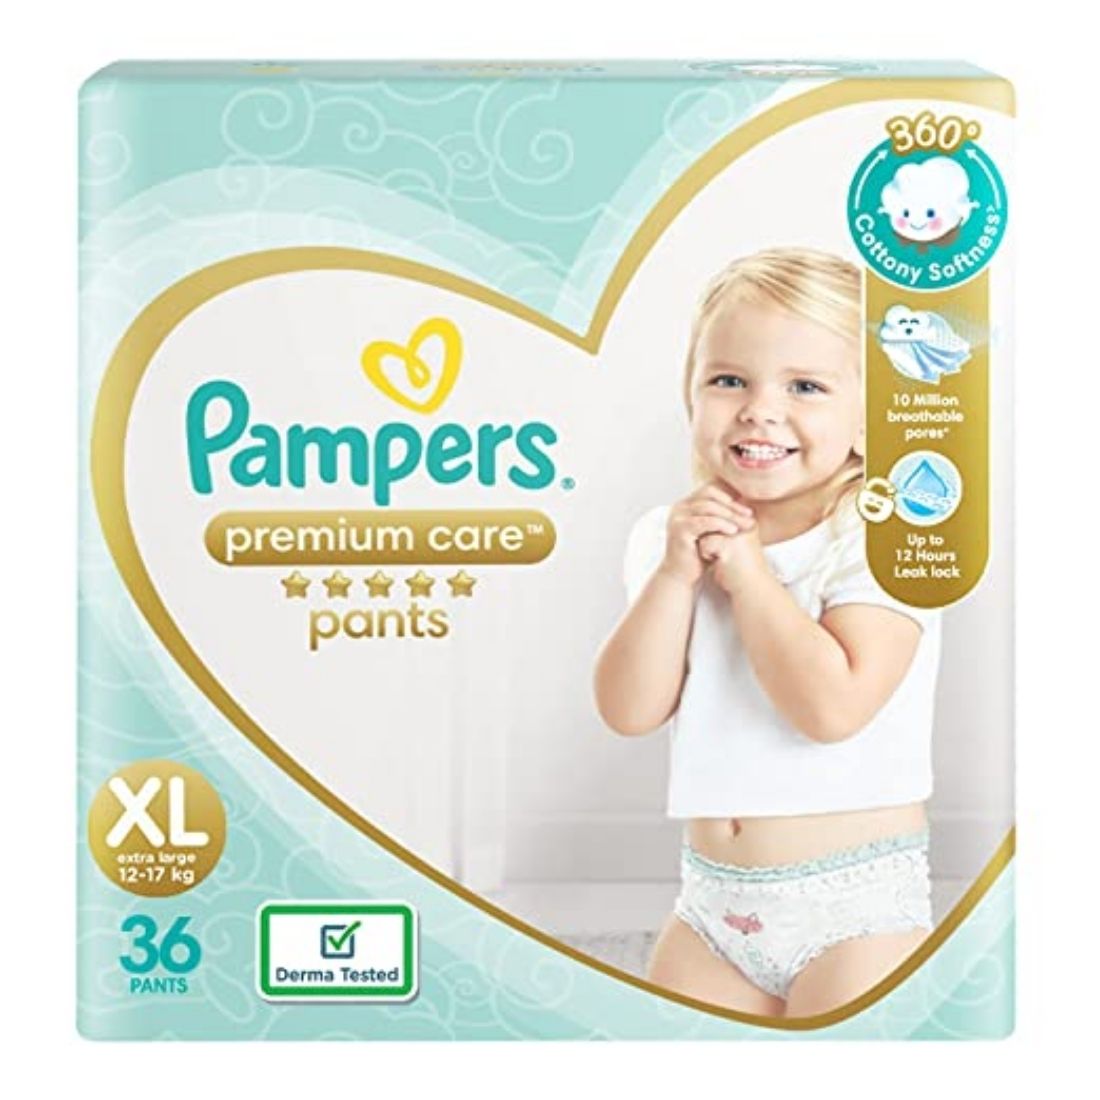 Pampers Premium Care Diaper Pants, Baby Diapers with Aloe Vera